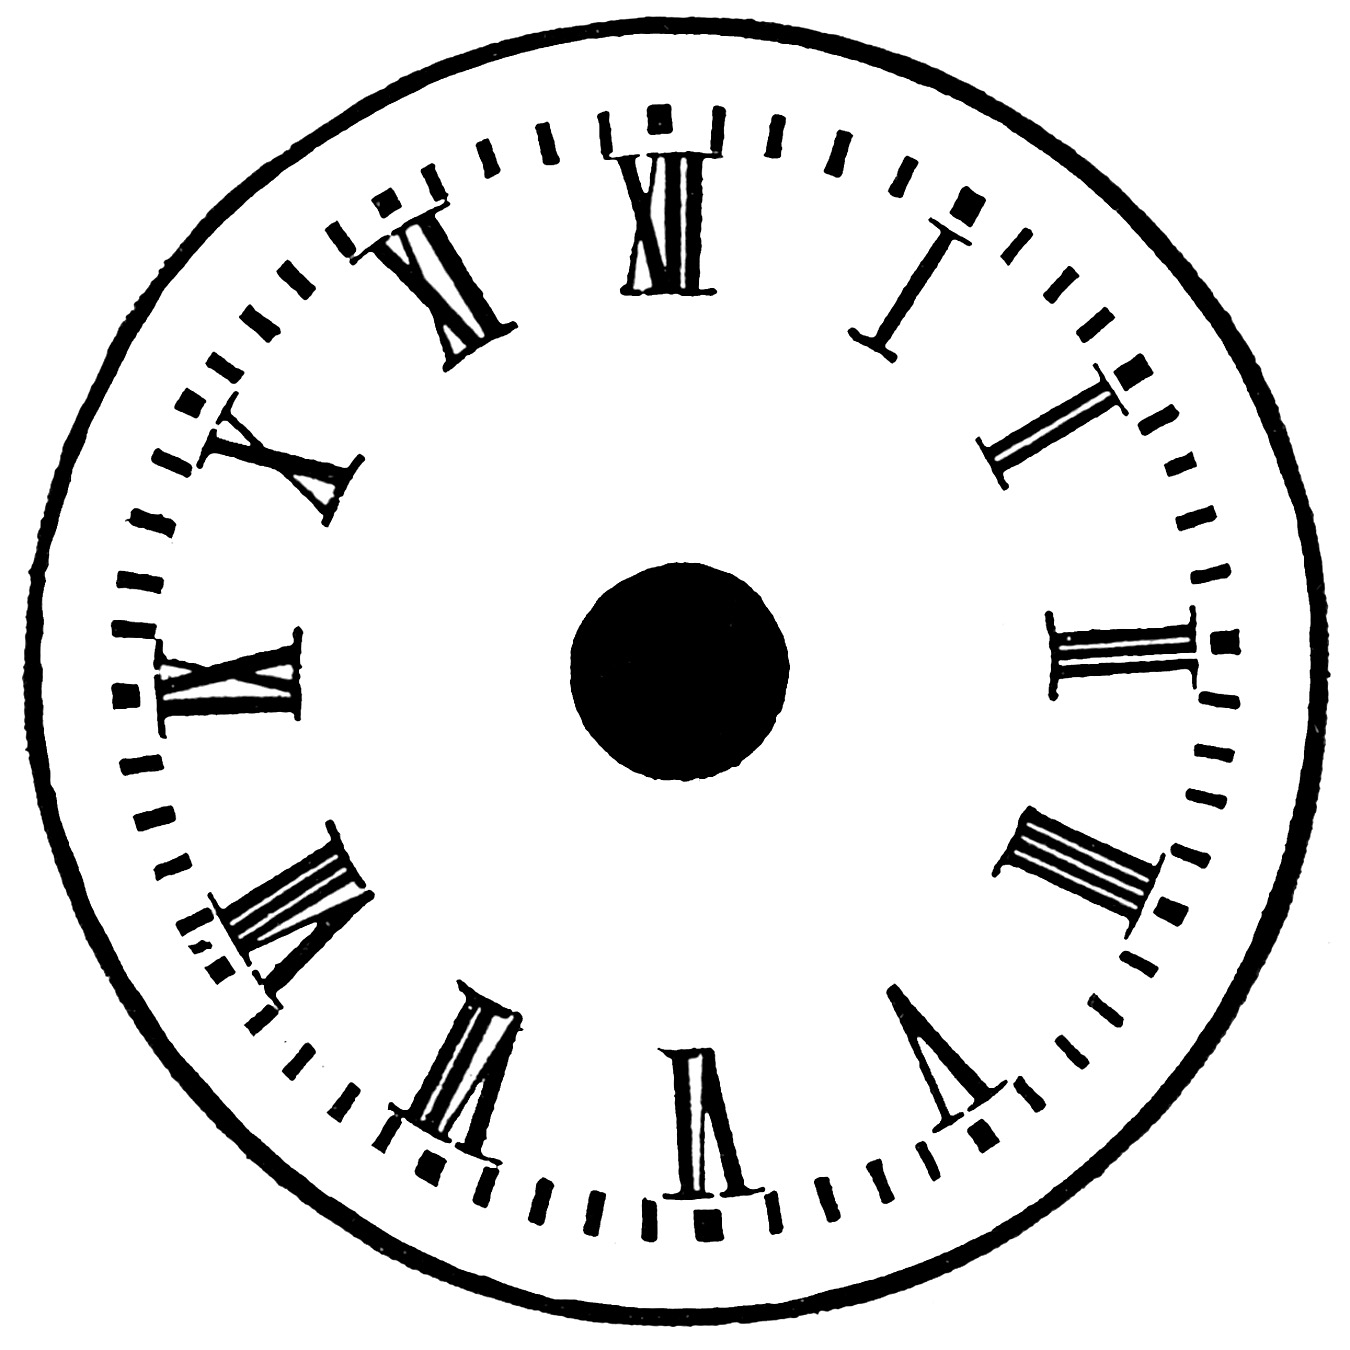 Best Photos of Clock Face Without Hands - Clock Face with No Hands ...